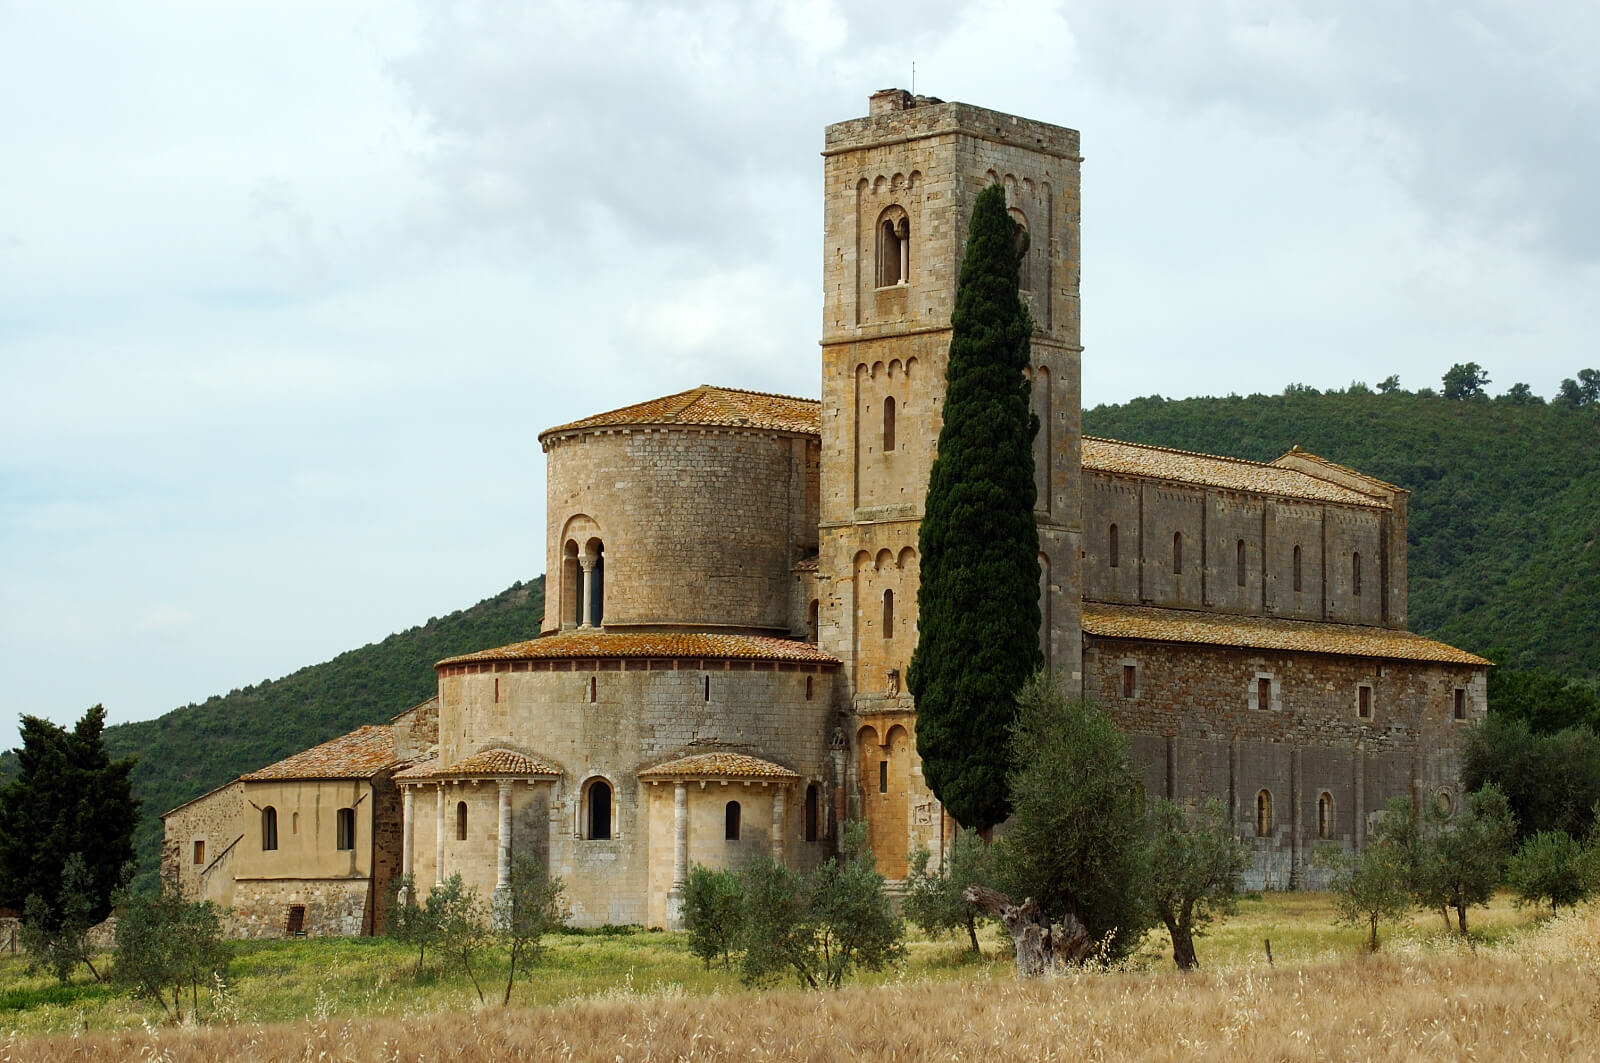 View of the abbey of Sant'Antimo (Siena) from outside